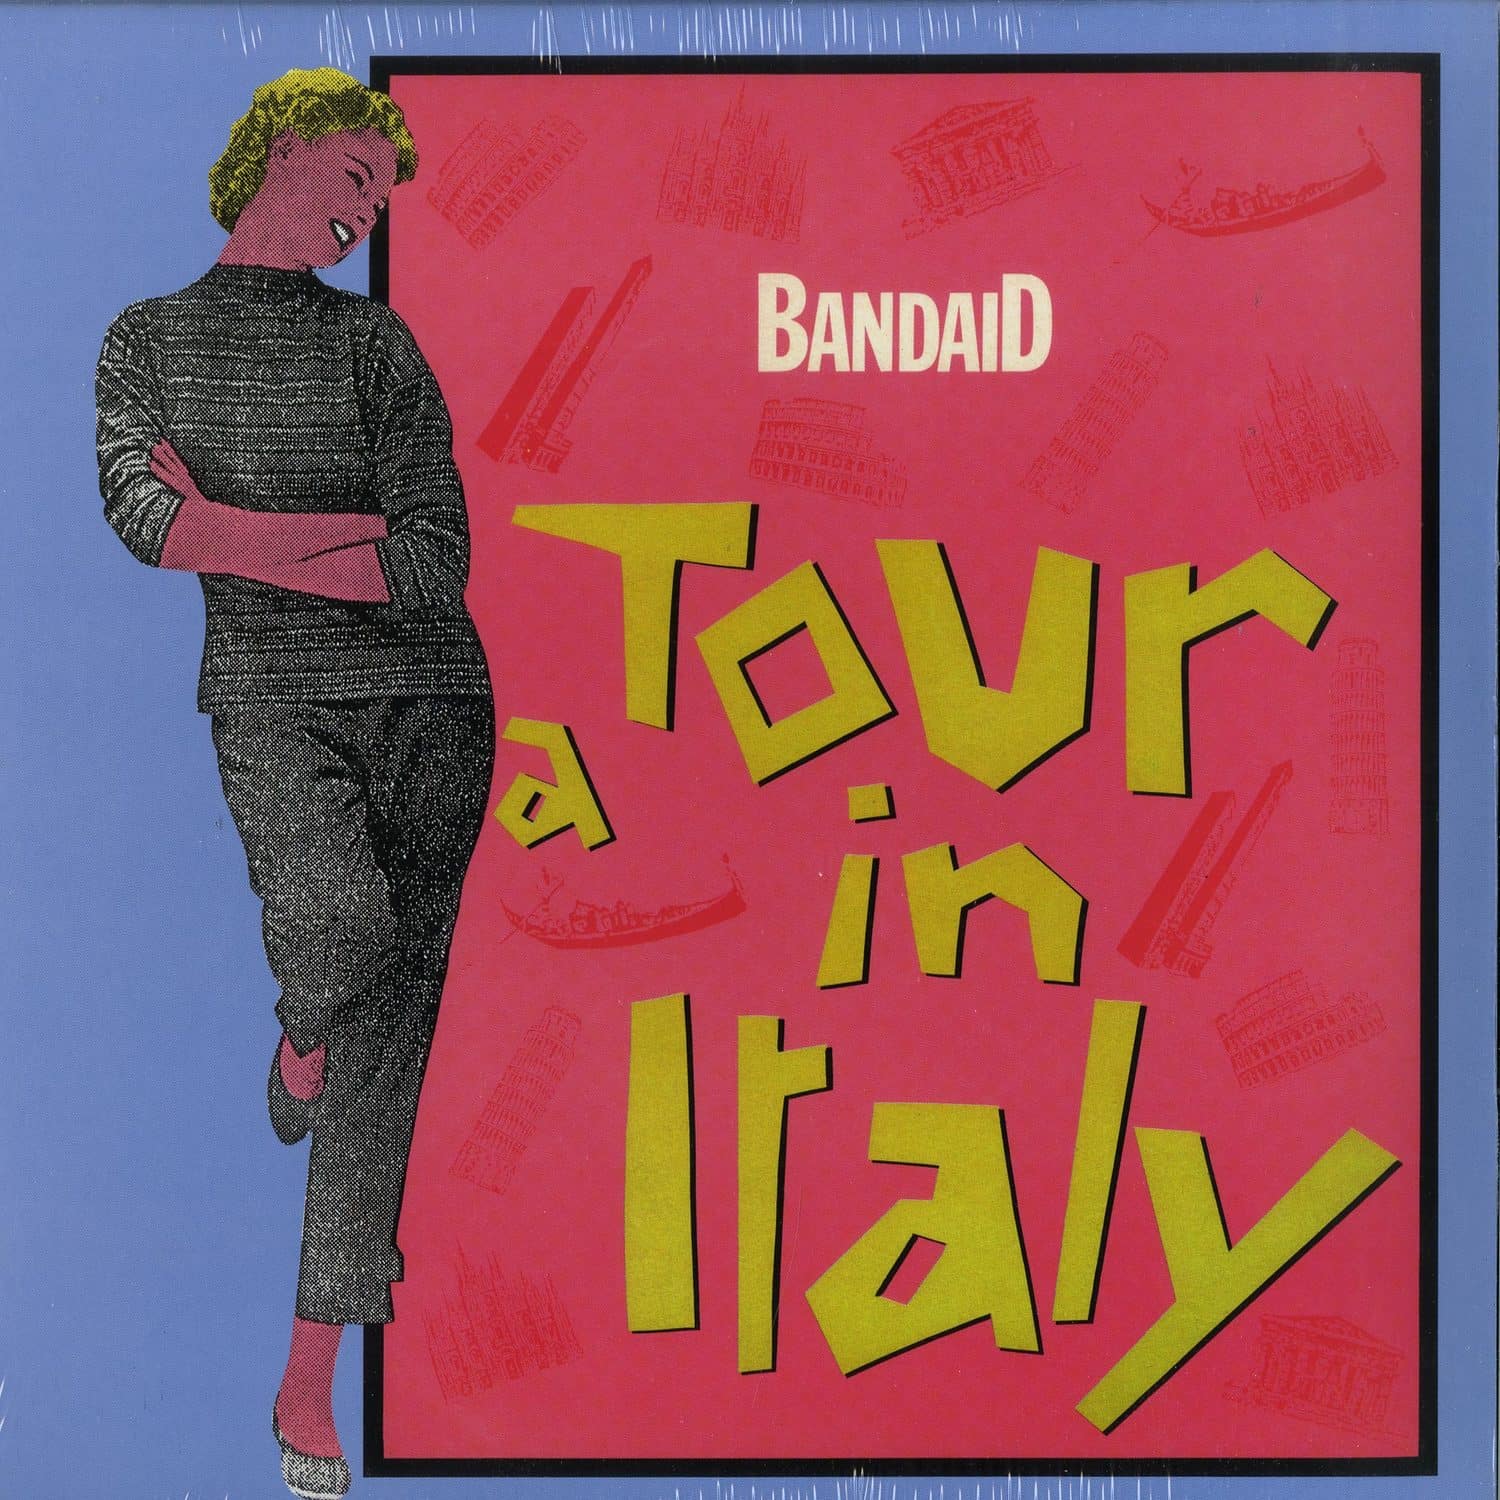 Band Aid - A TOUR IN ITALY